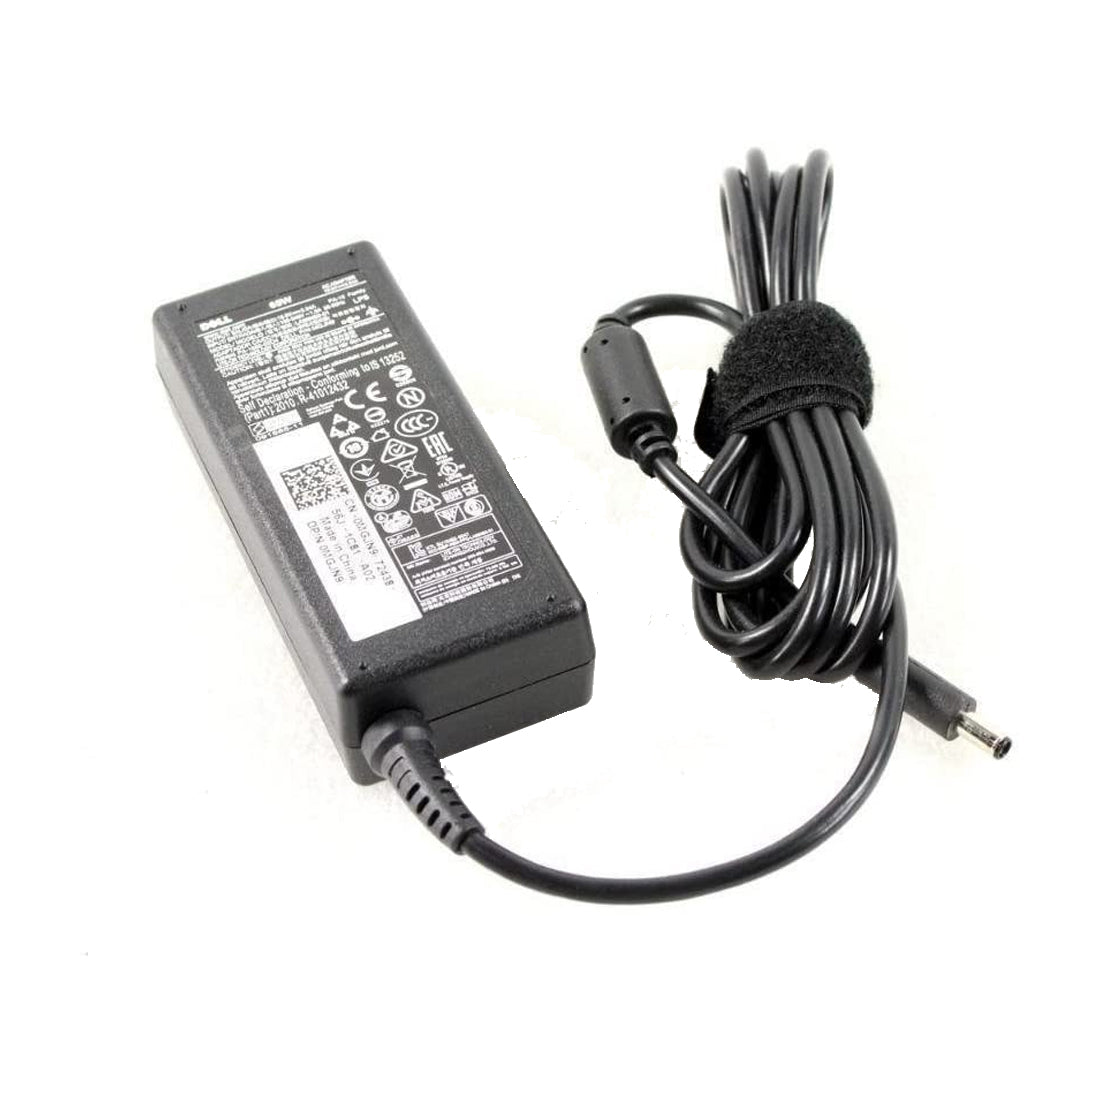 Dell Original 65W 19.5V 4.5mm Pin Laptop Charger Adapter for Inspiron 15 5580 With Power Cord